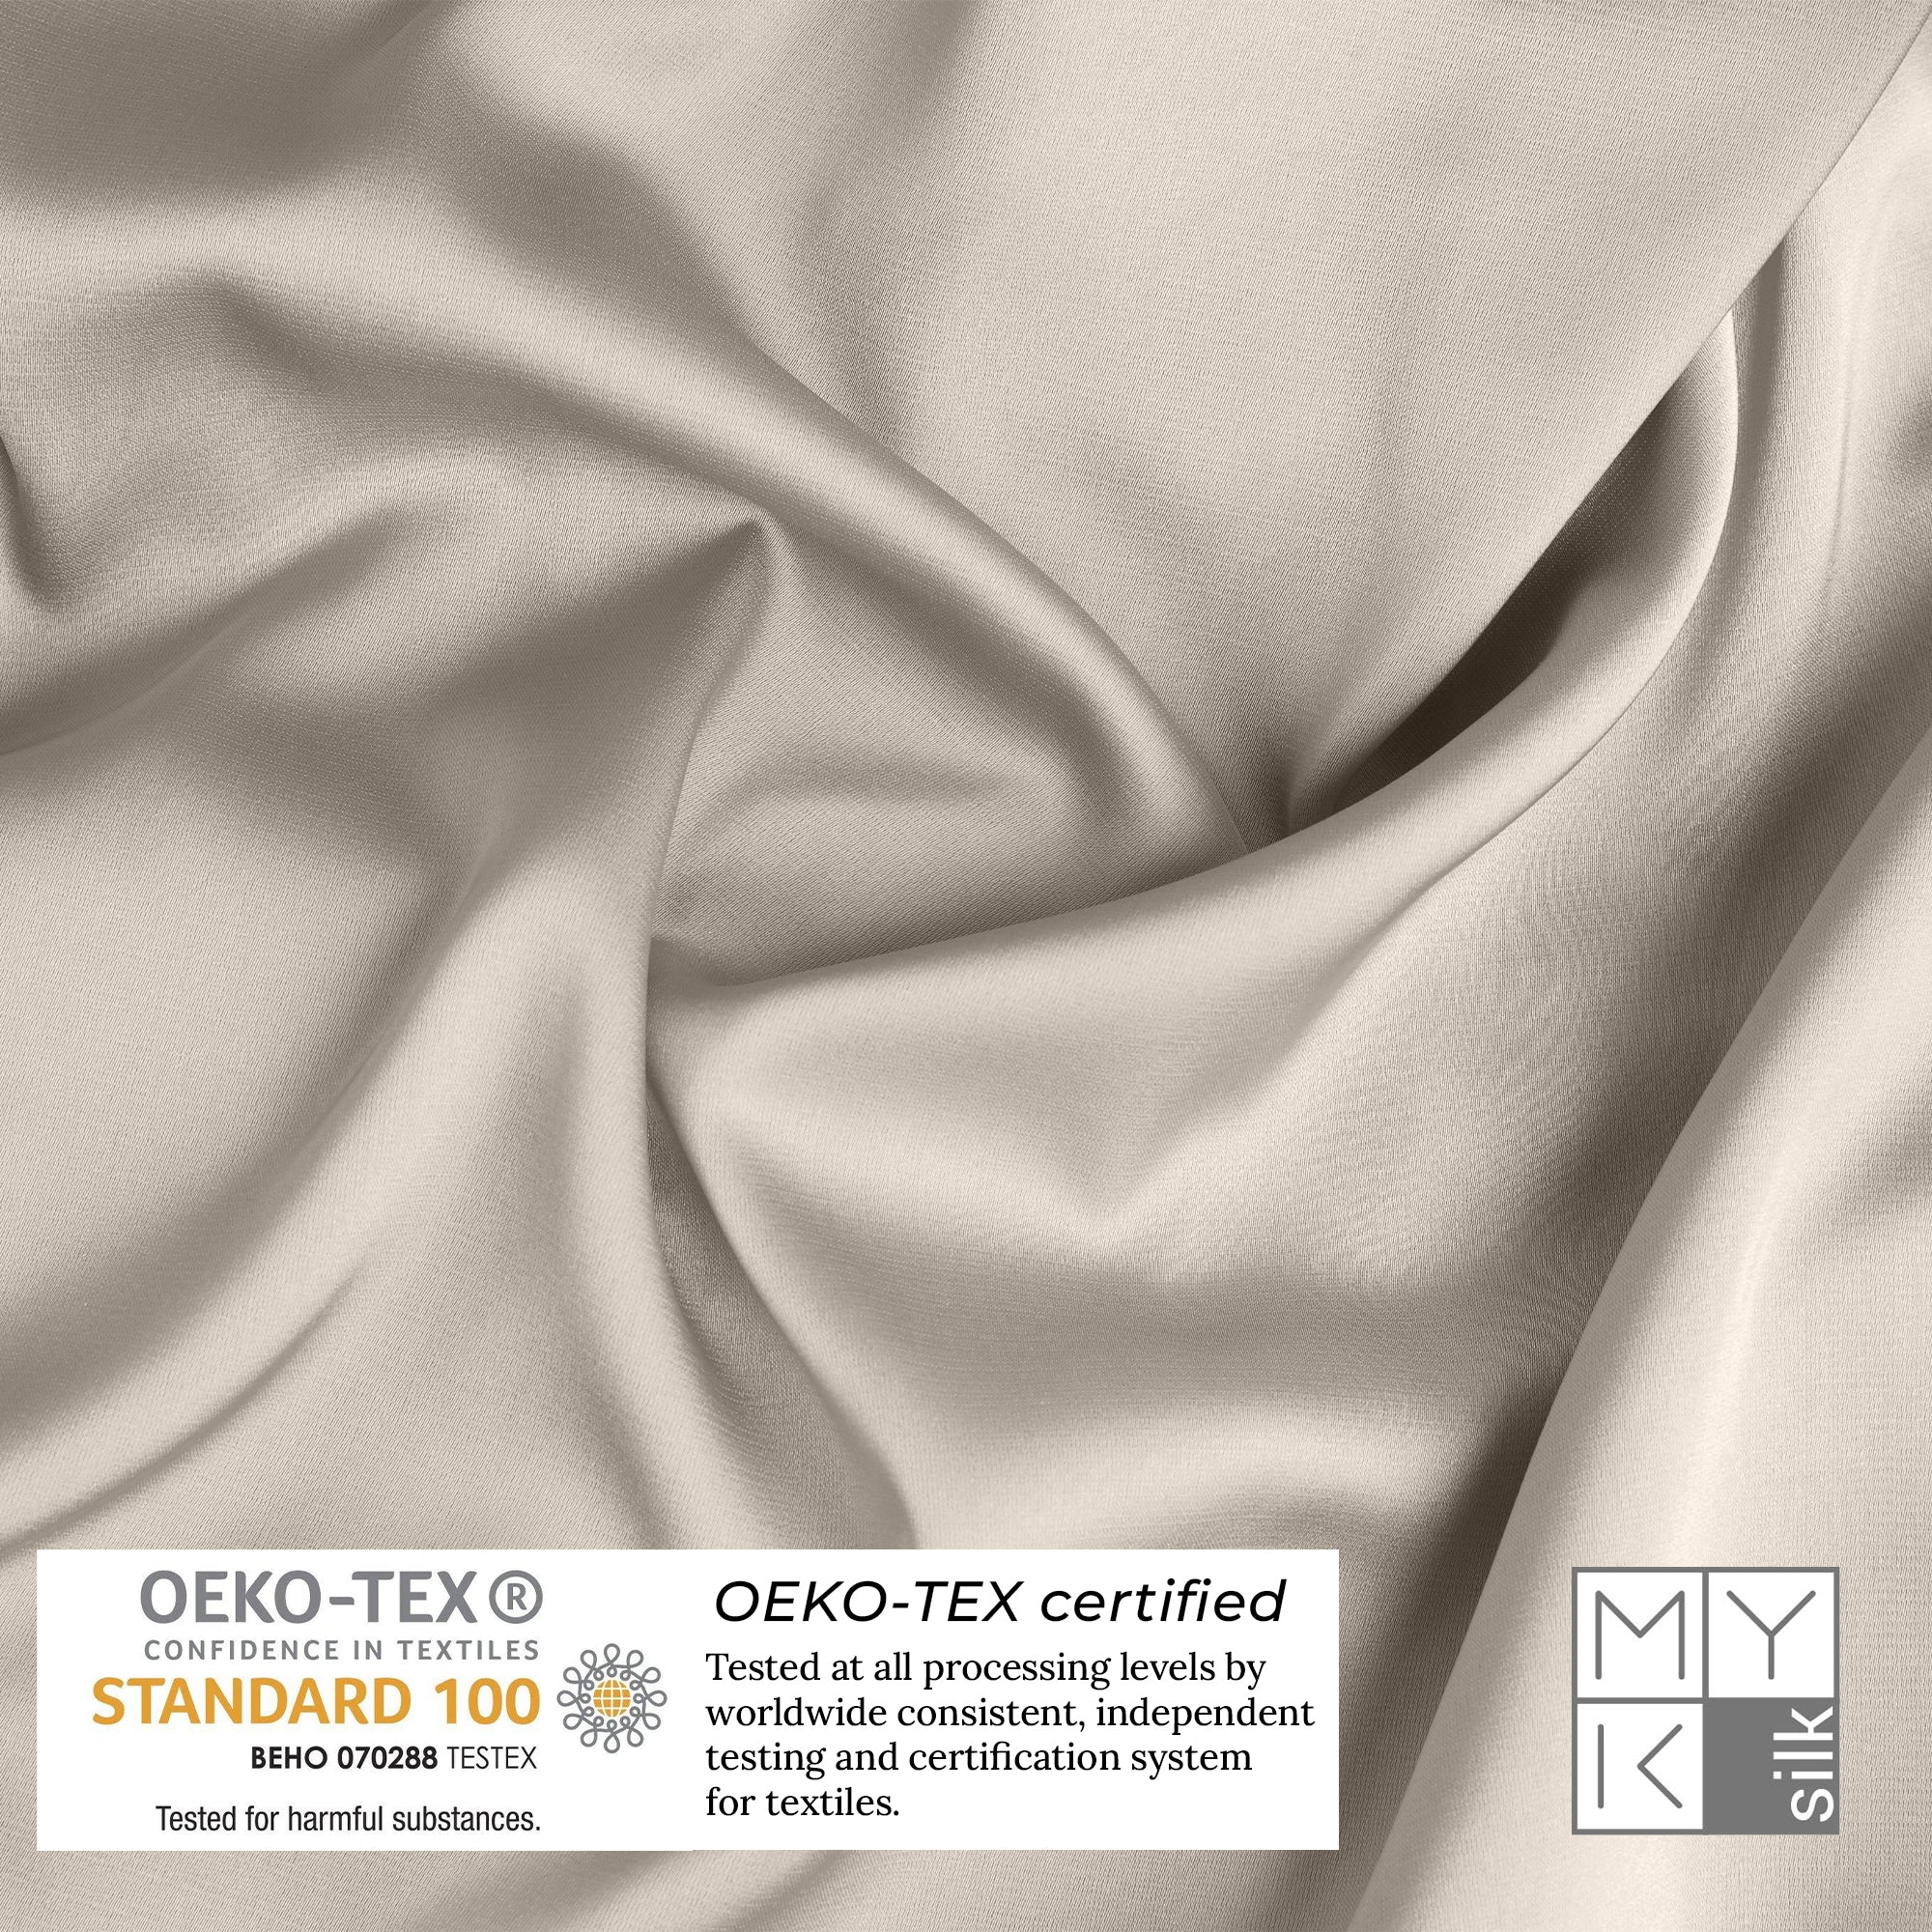 Products Luxury Mulberry Silk Pillowcase (25 momme) - MYK Silk #color_beige